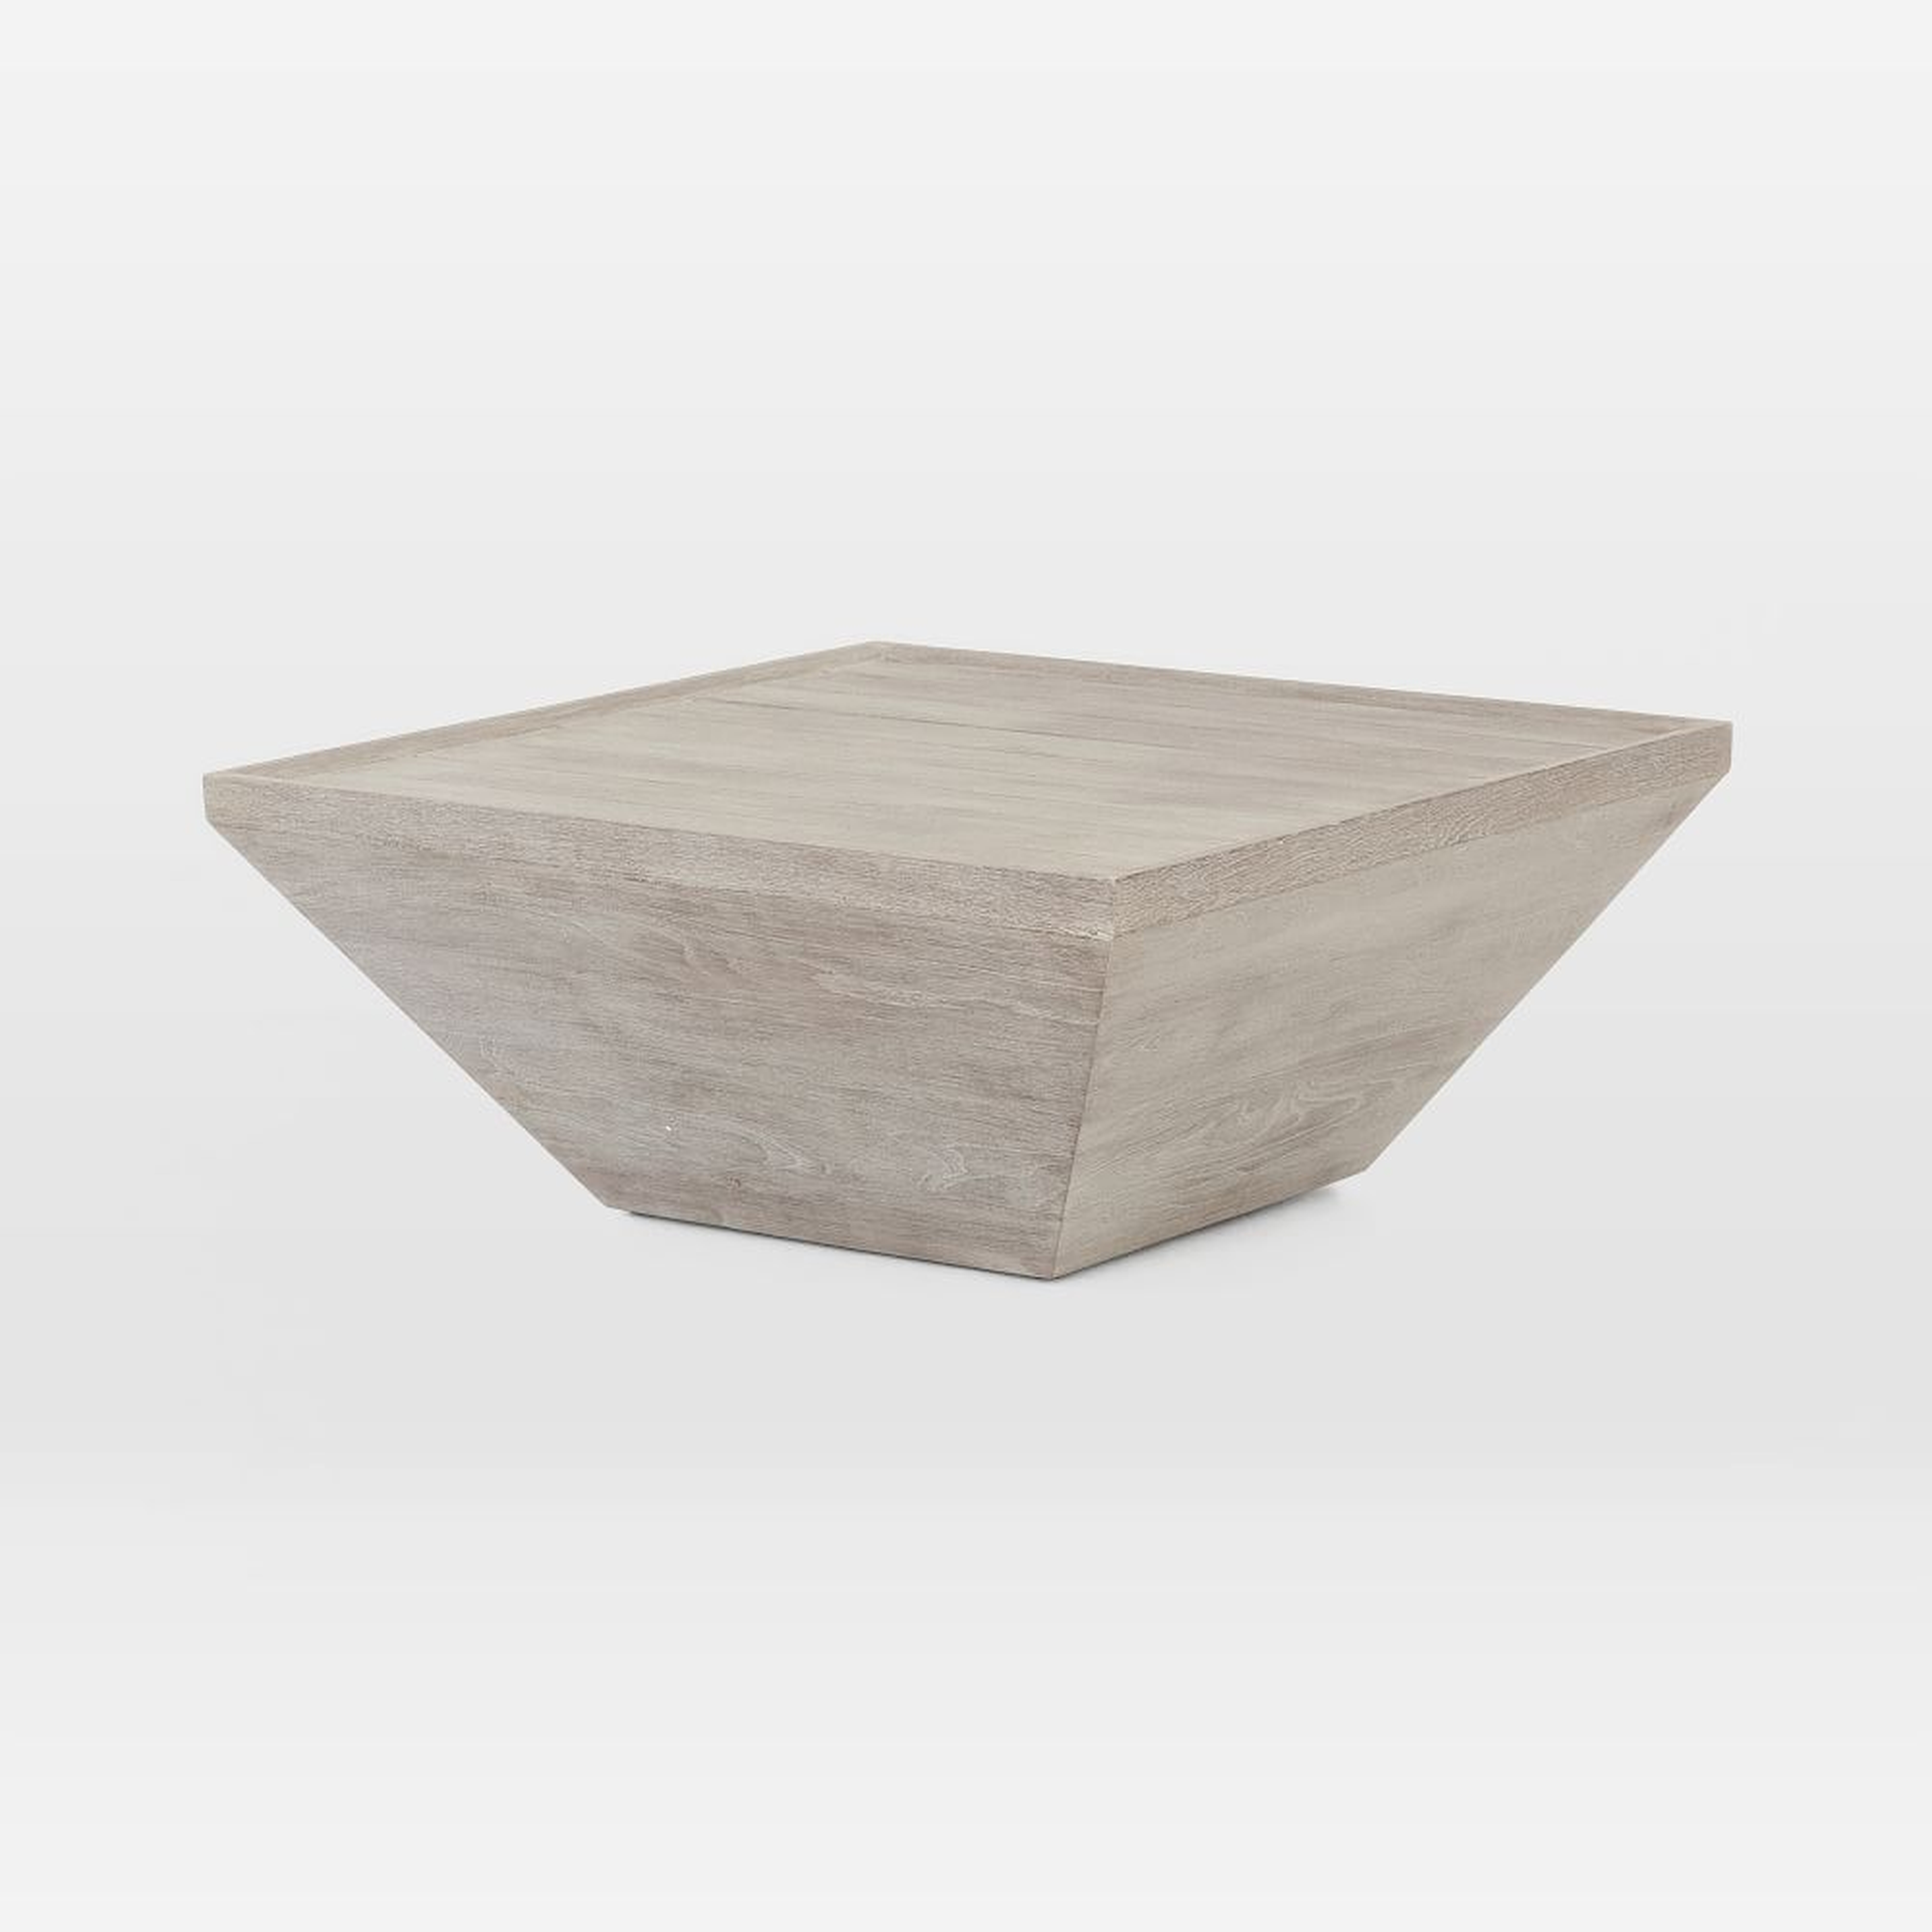 Teak Wood Square Outdoor Coffee Table, Weathered Gray - West Elm